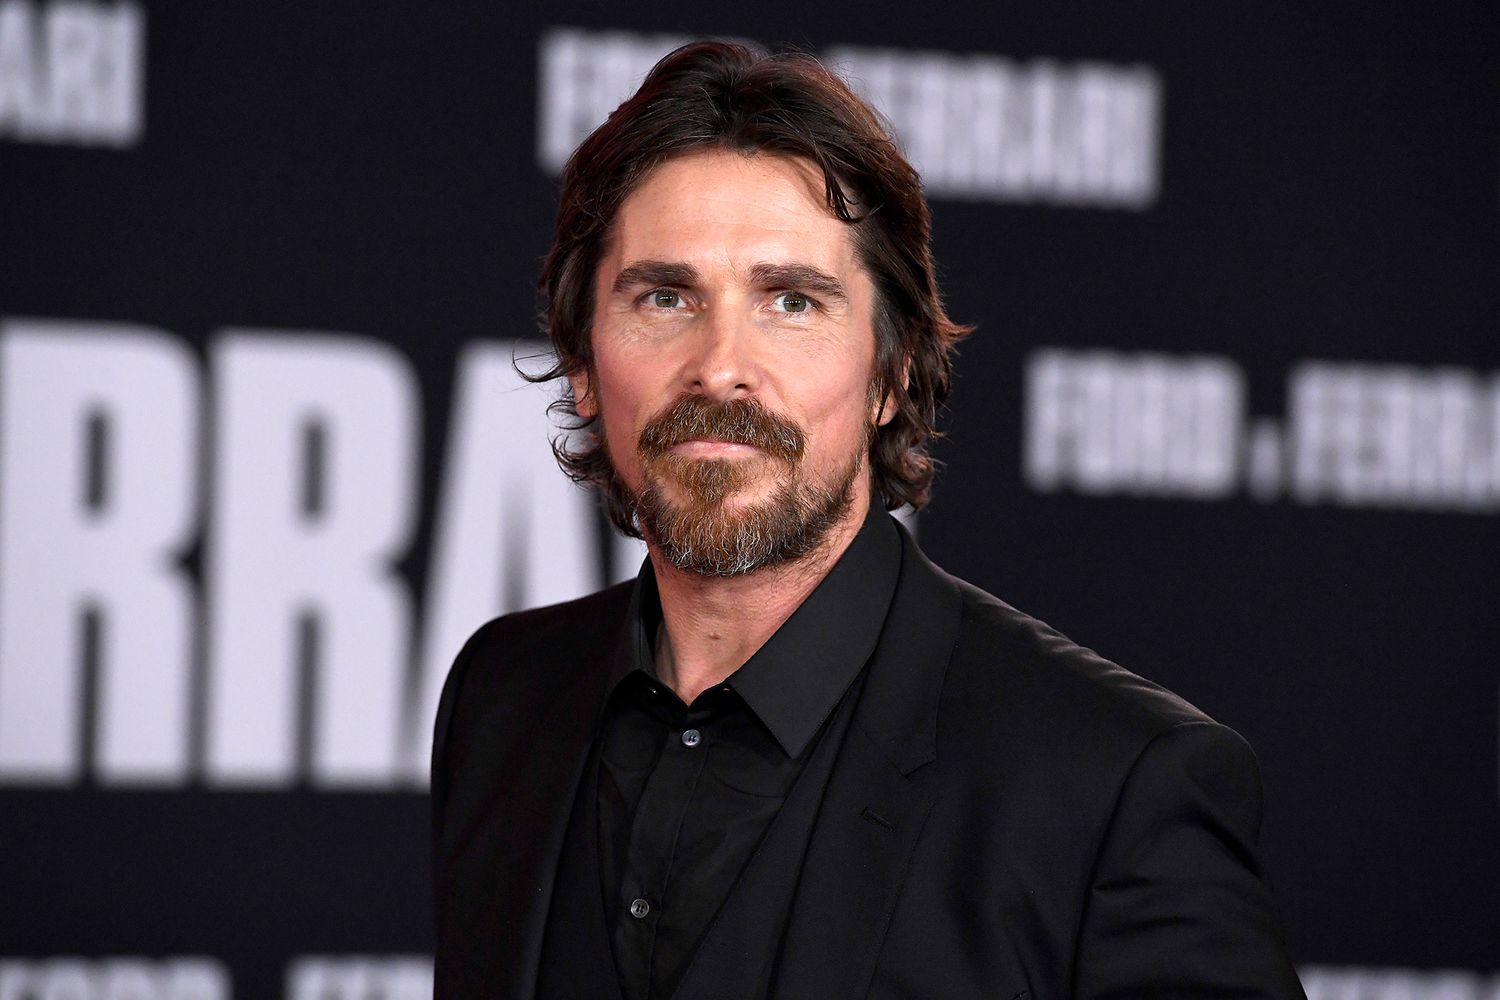 Christian Bale on entering the MCU with Thor 4: 'I've done what? I haven't entered s—'